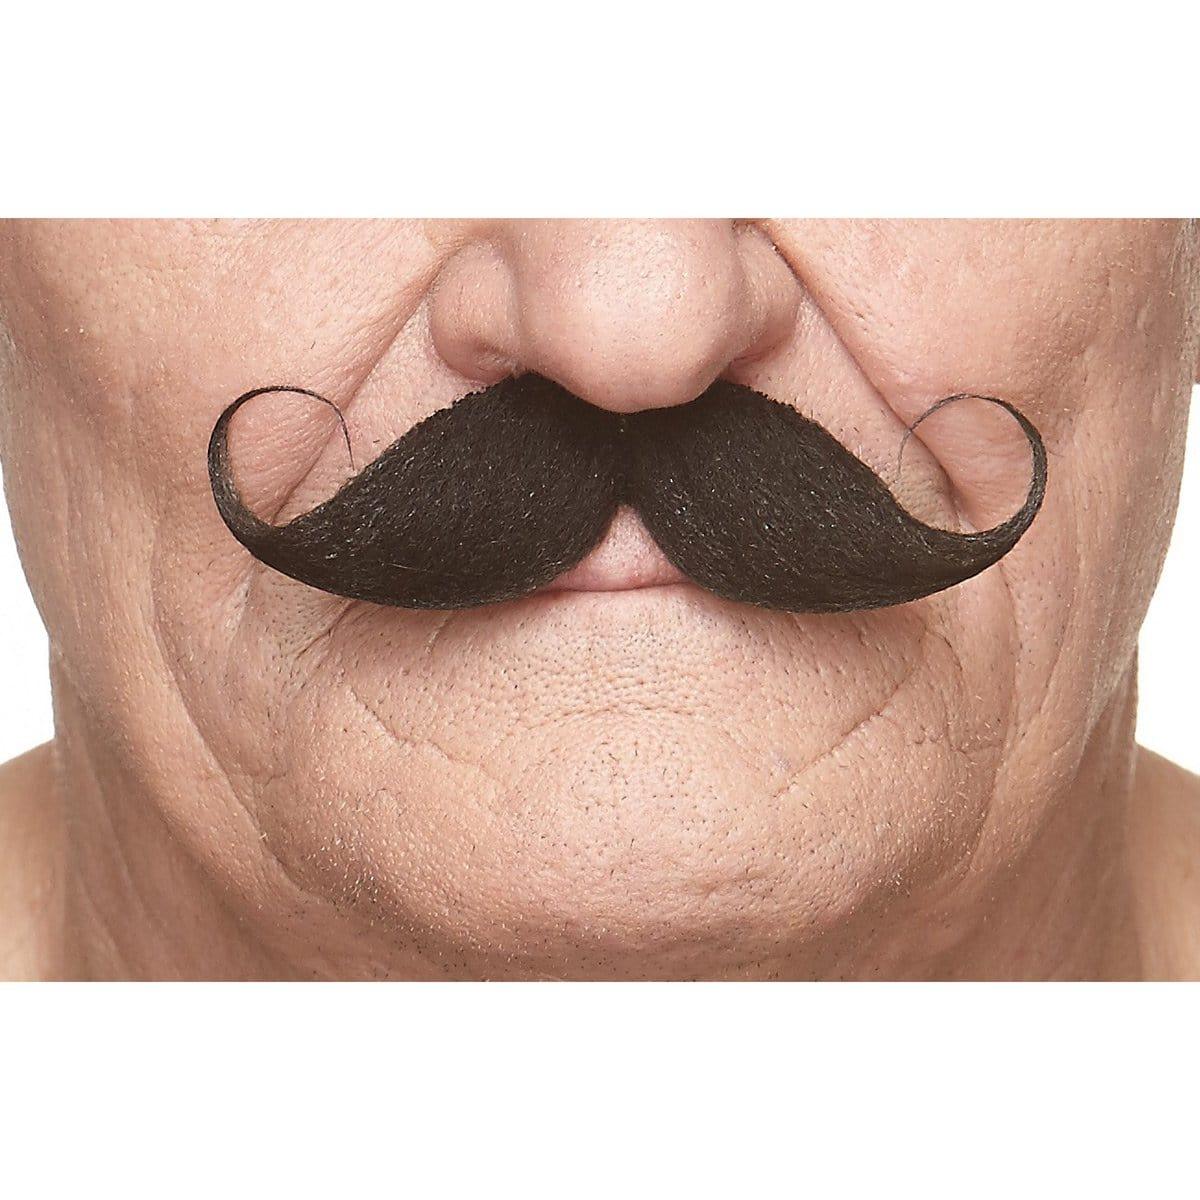 Buy Costume Accessories Black barbershop mustache sold at Party Expert